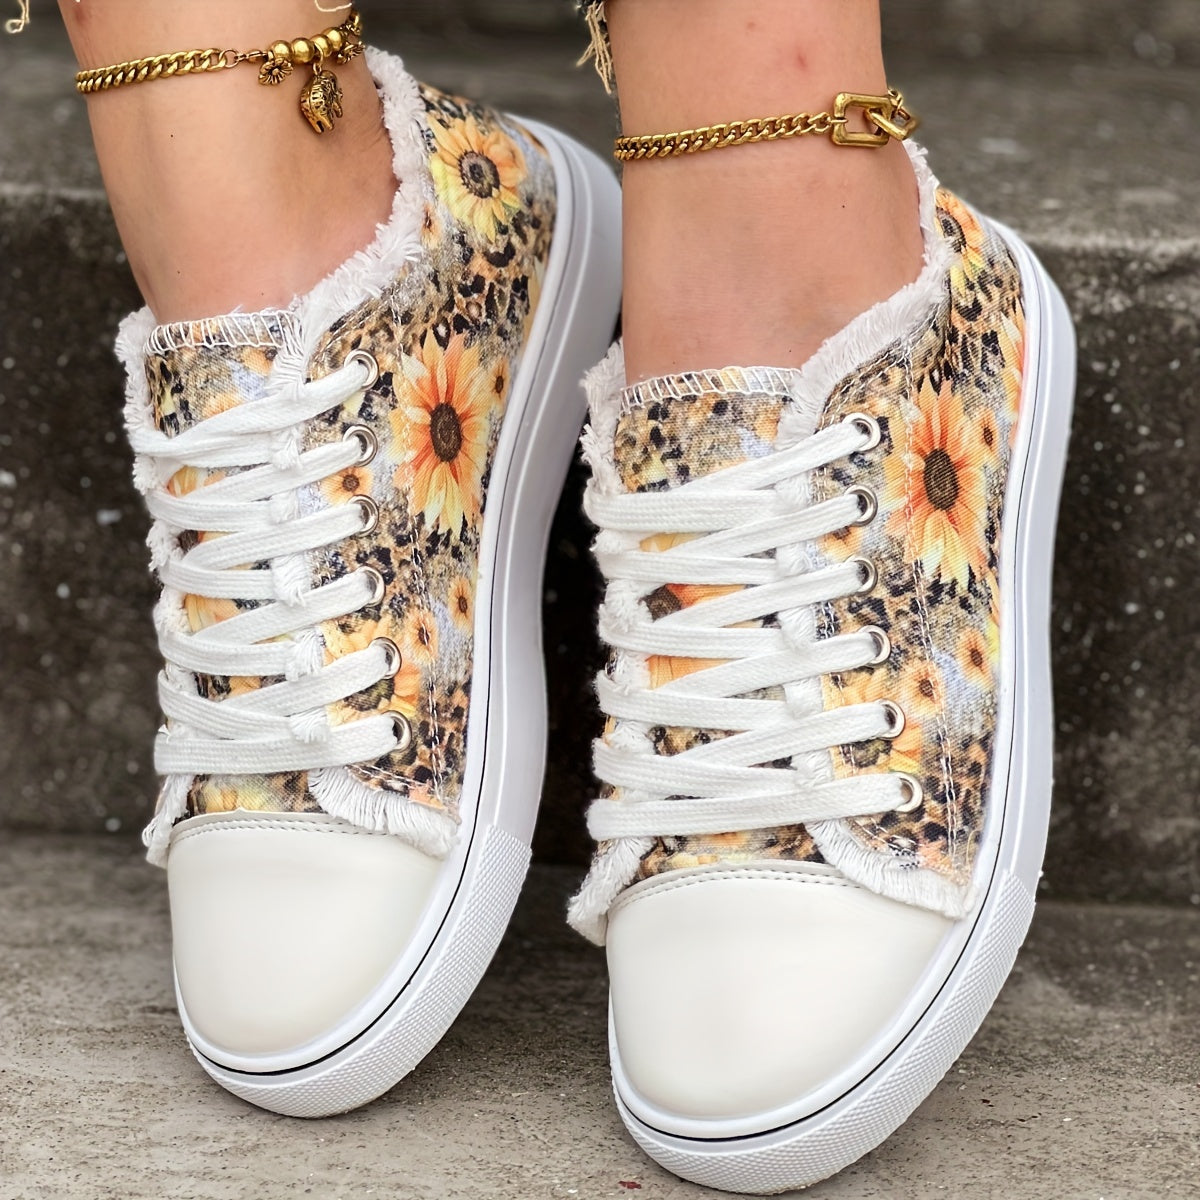 Sunflower Print Canvas Shoes, Casual Outdoor Low Tops